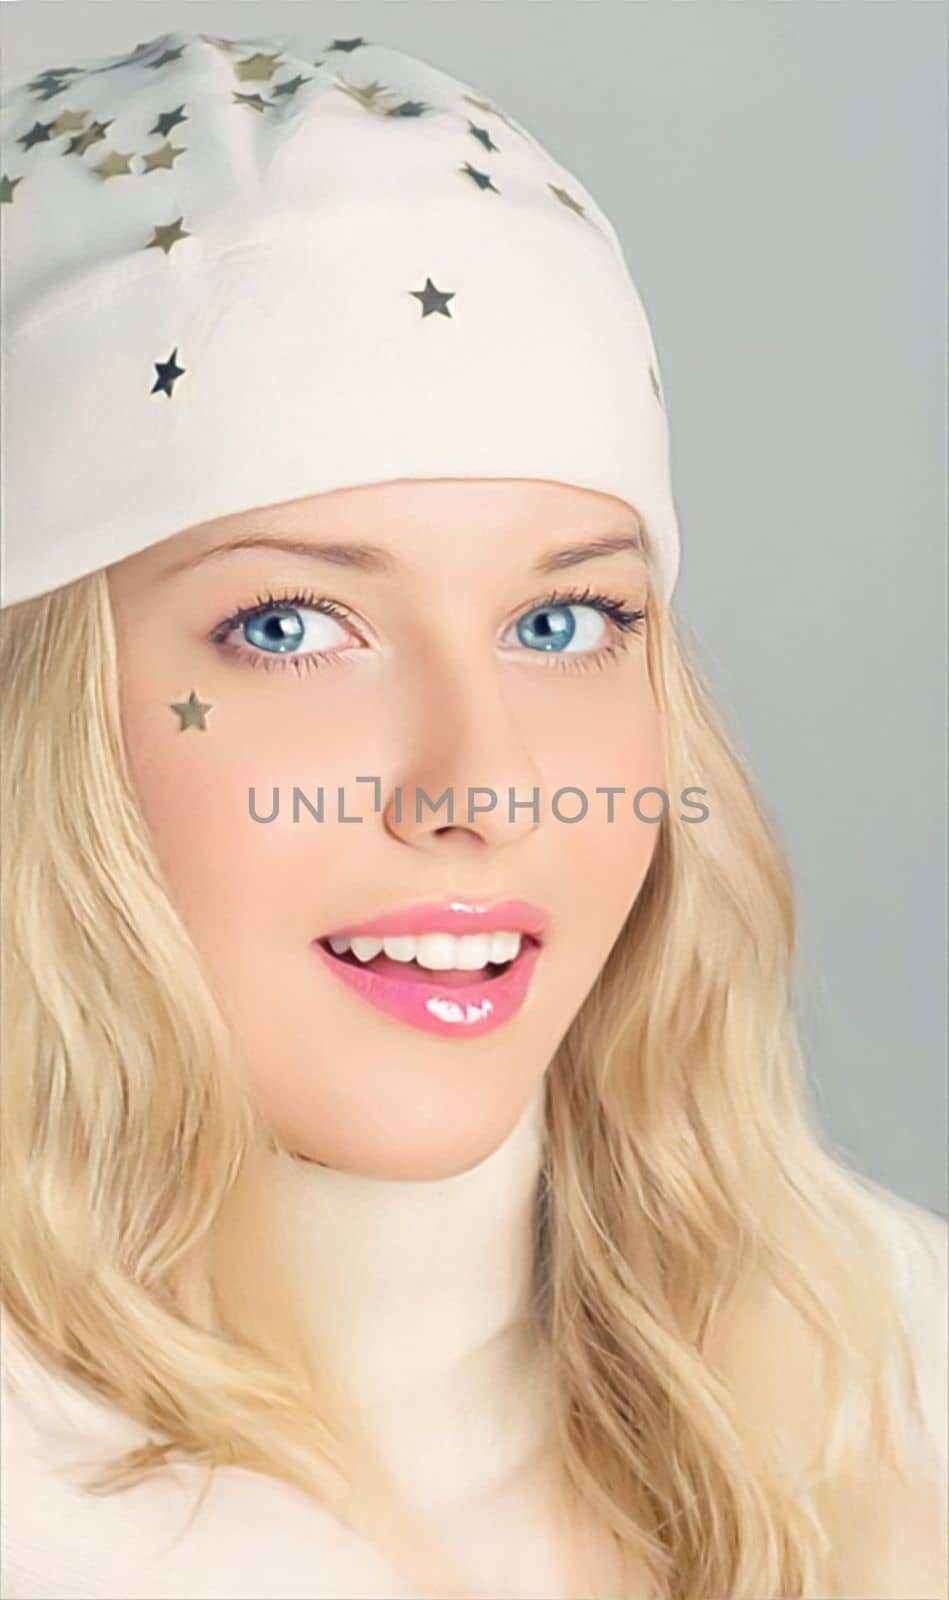 Happy holidays, beautiful woman in white benny hat, and best wishes this Christmas and throughout the year. Smiling blonde girl with holiday spirit, celebrating the winter season by Anneleven